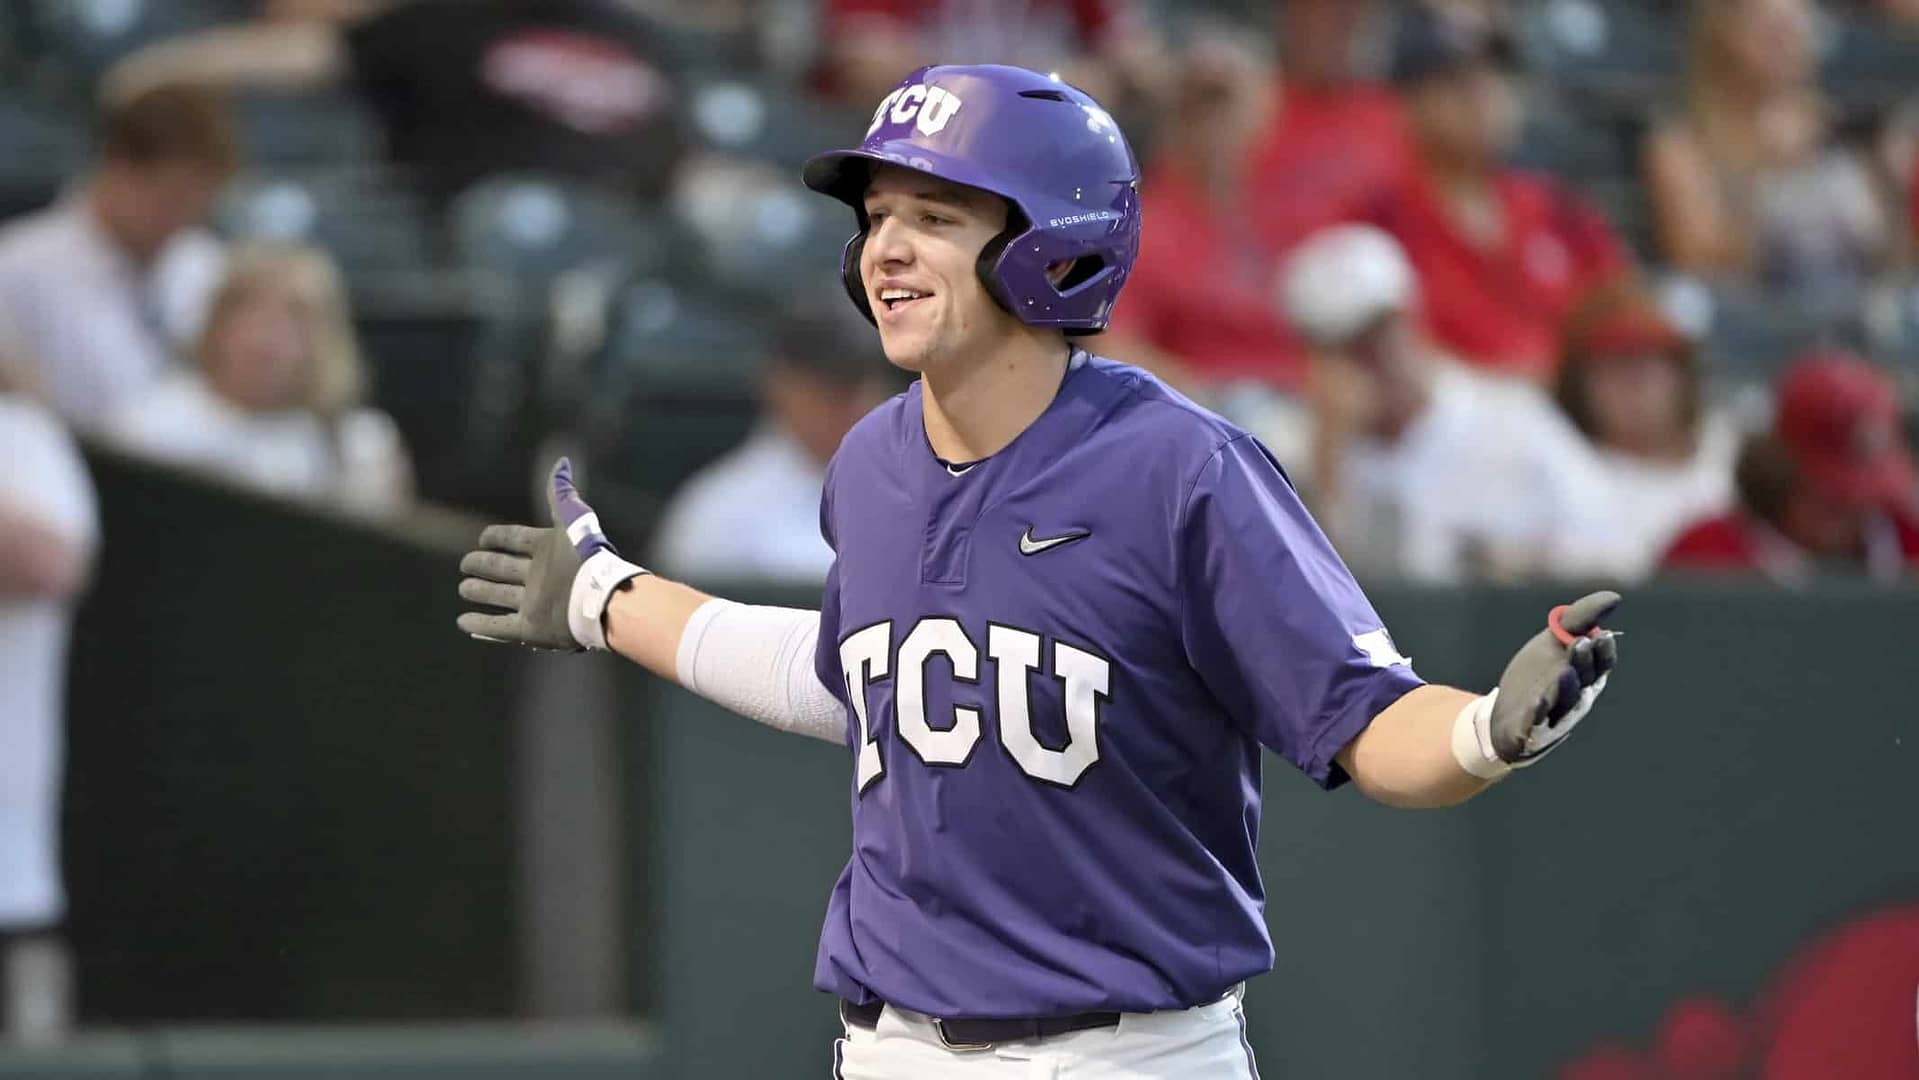 OddsShopper is on top of the 2023 College World Series, and some of the top college baseball bets and picks for today, June 21, include...